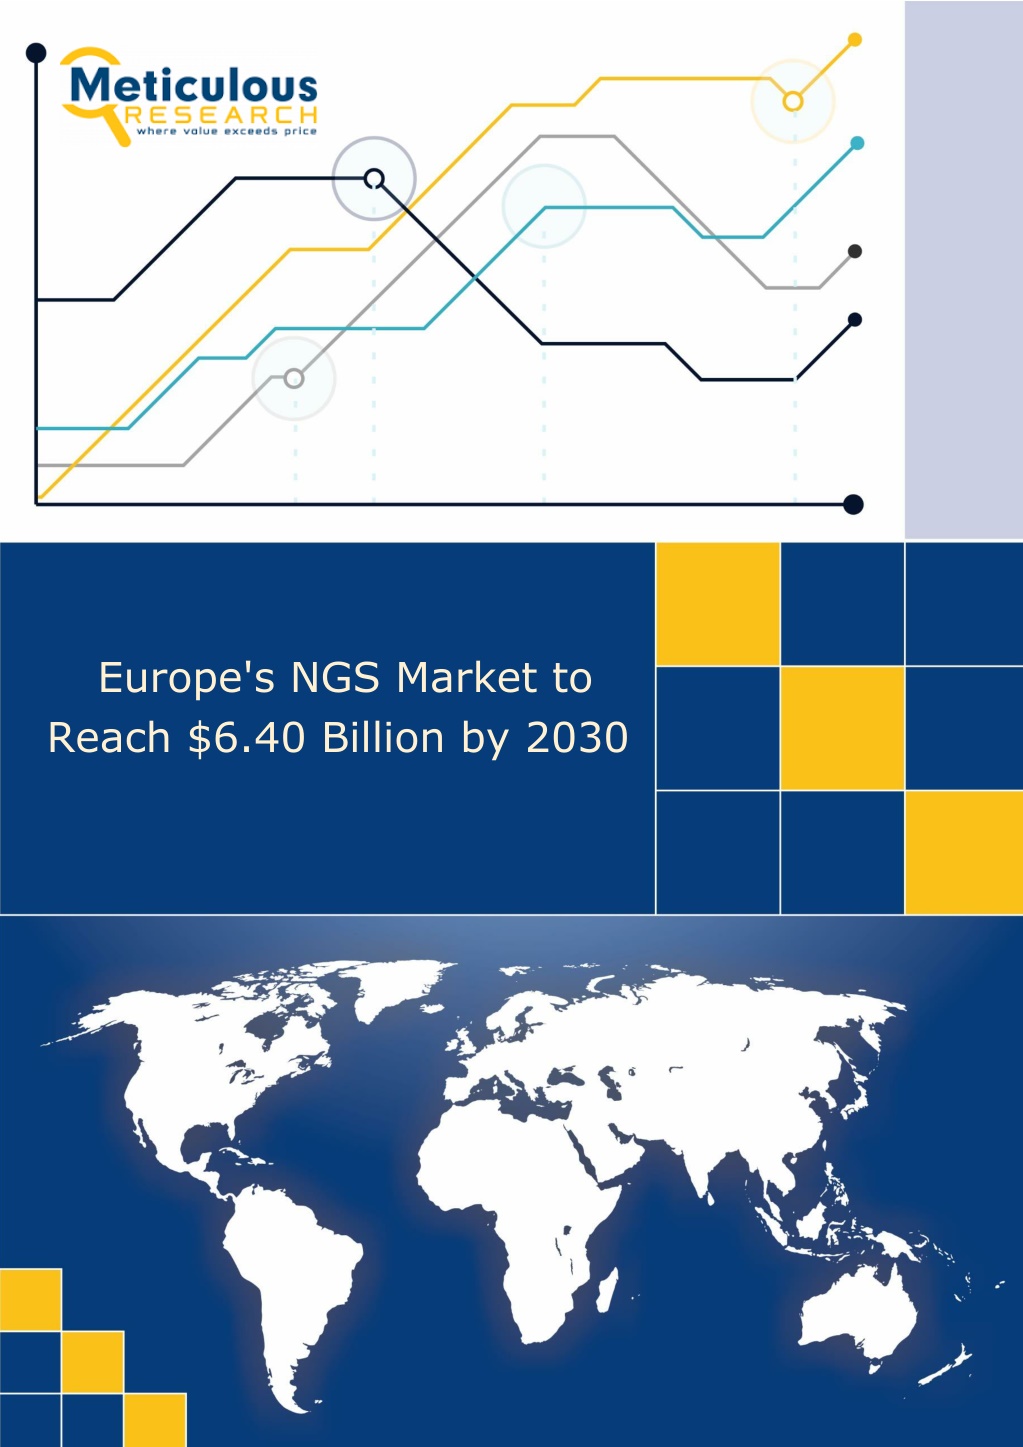 europe s ngs market to reach 6 40 billion by 2030 l.w